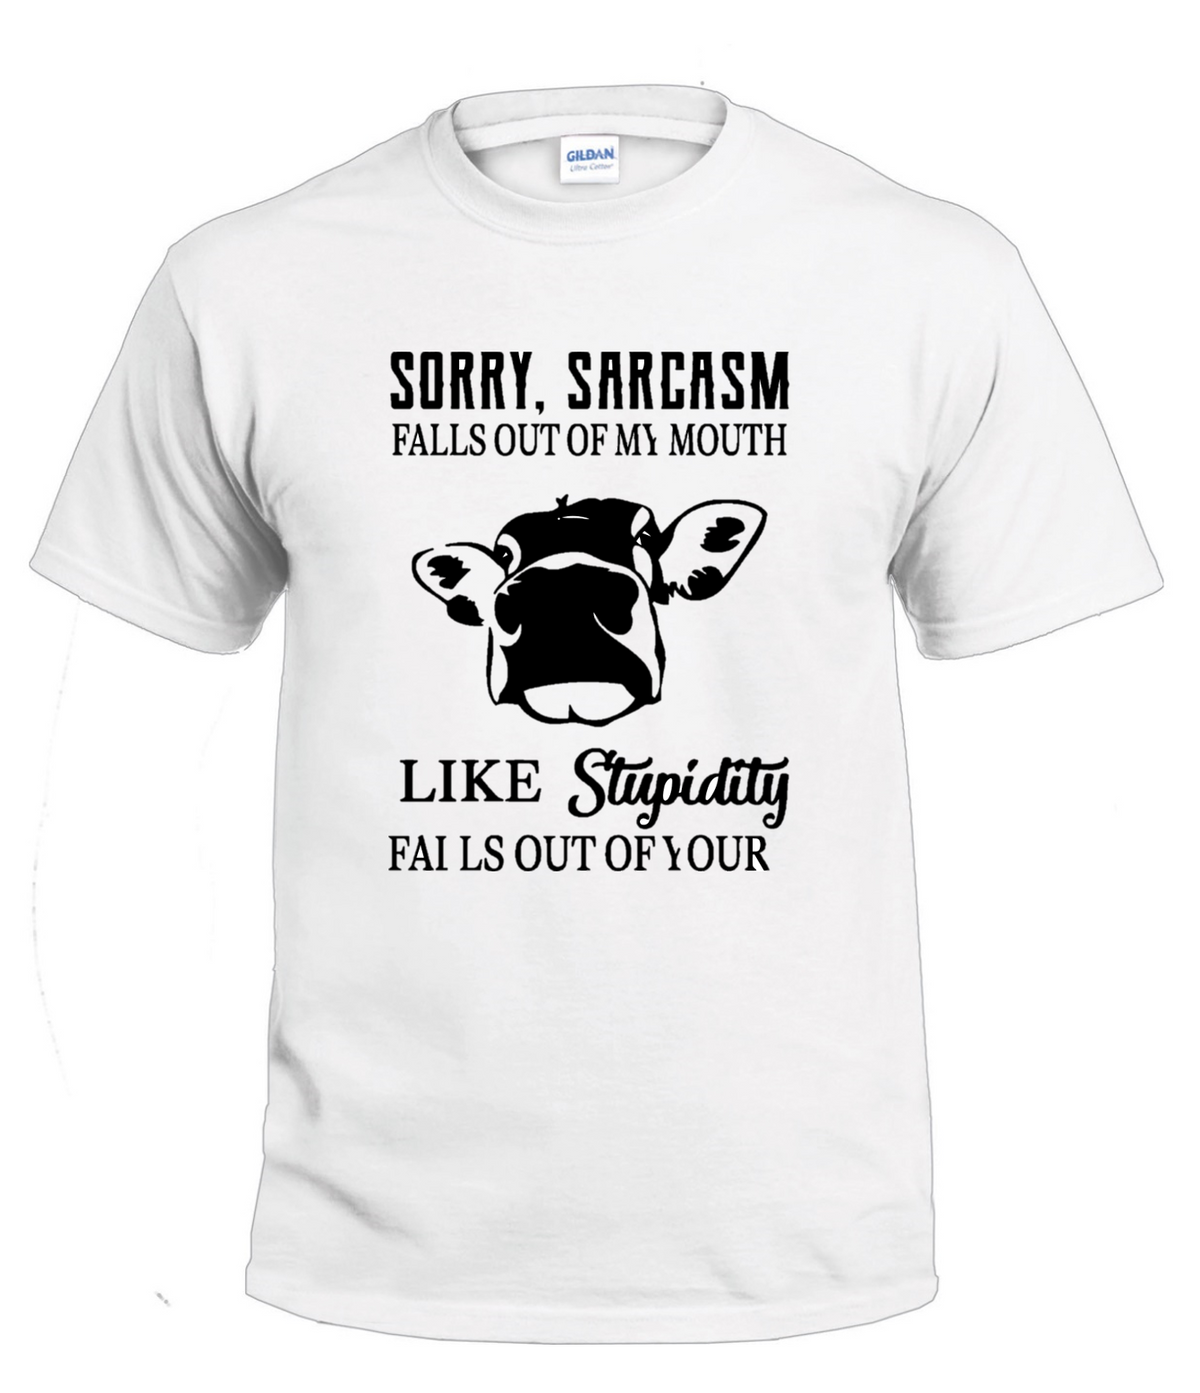 Sorry, Sarcasm Falls Out of My Mouth Sassy t-shirt